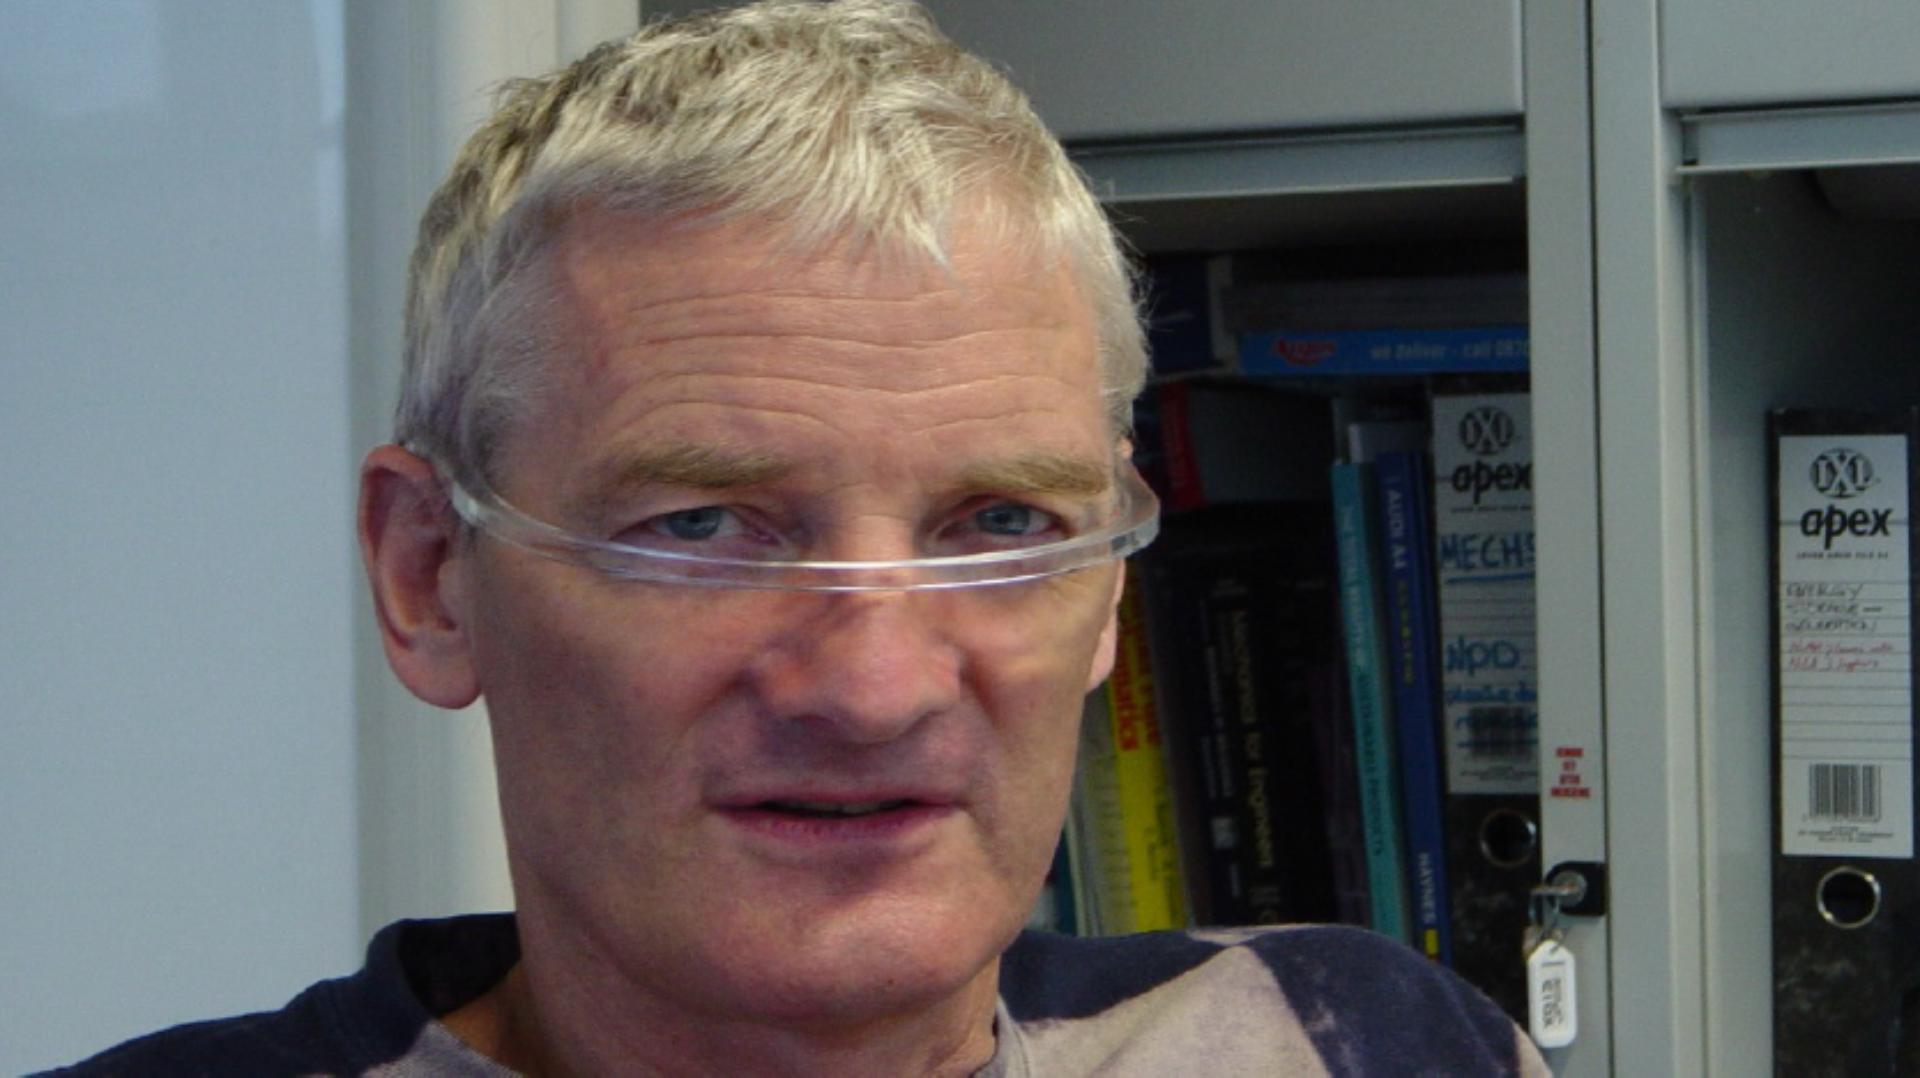 Close up portrait photo of James Dyson wearing the Halo prototype